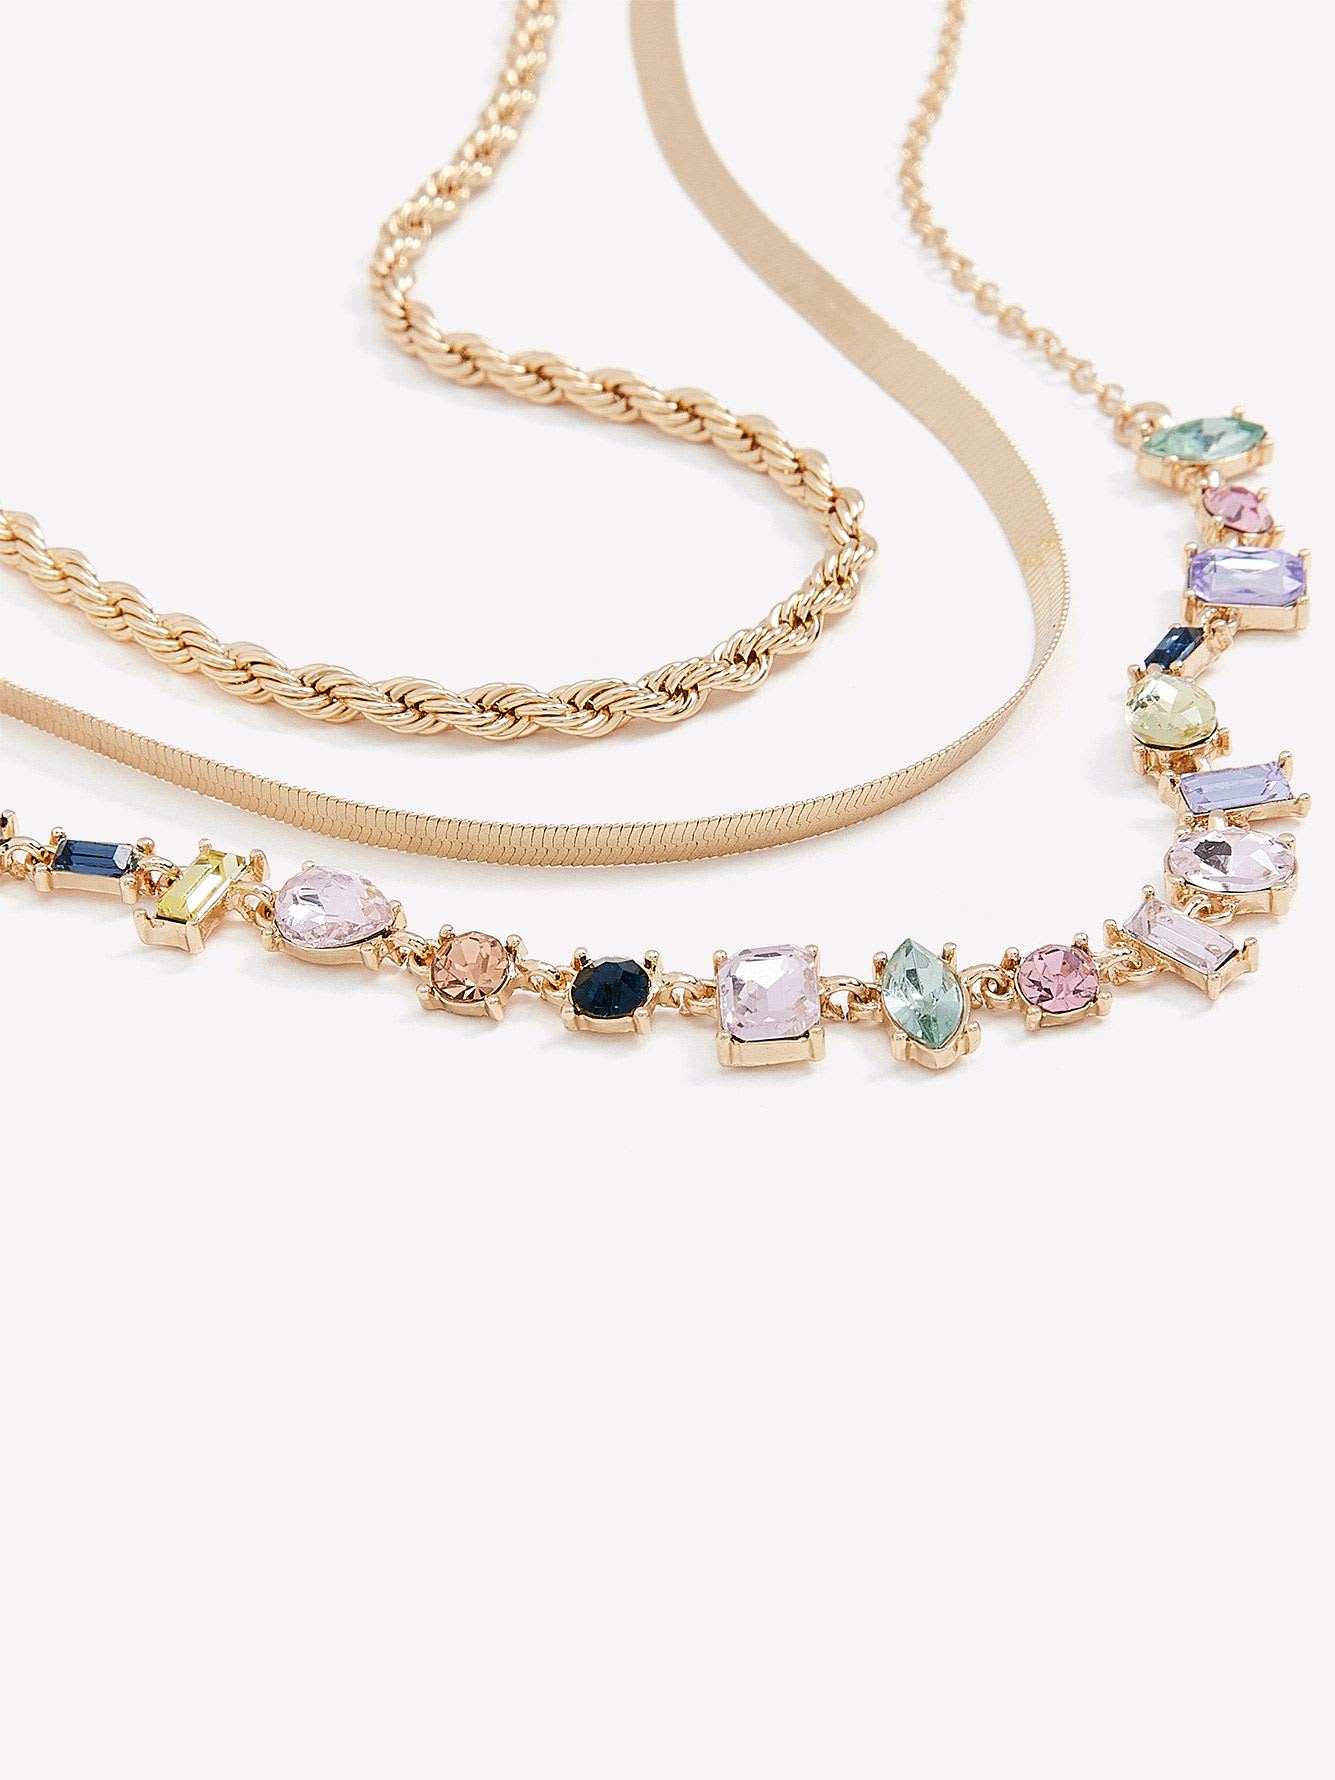 Three-Layer Golden Necklace with Dainty Stones